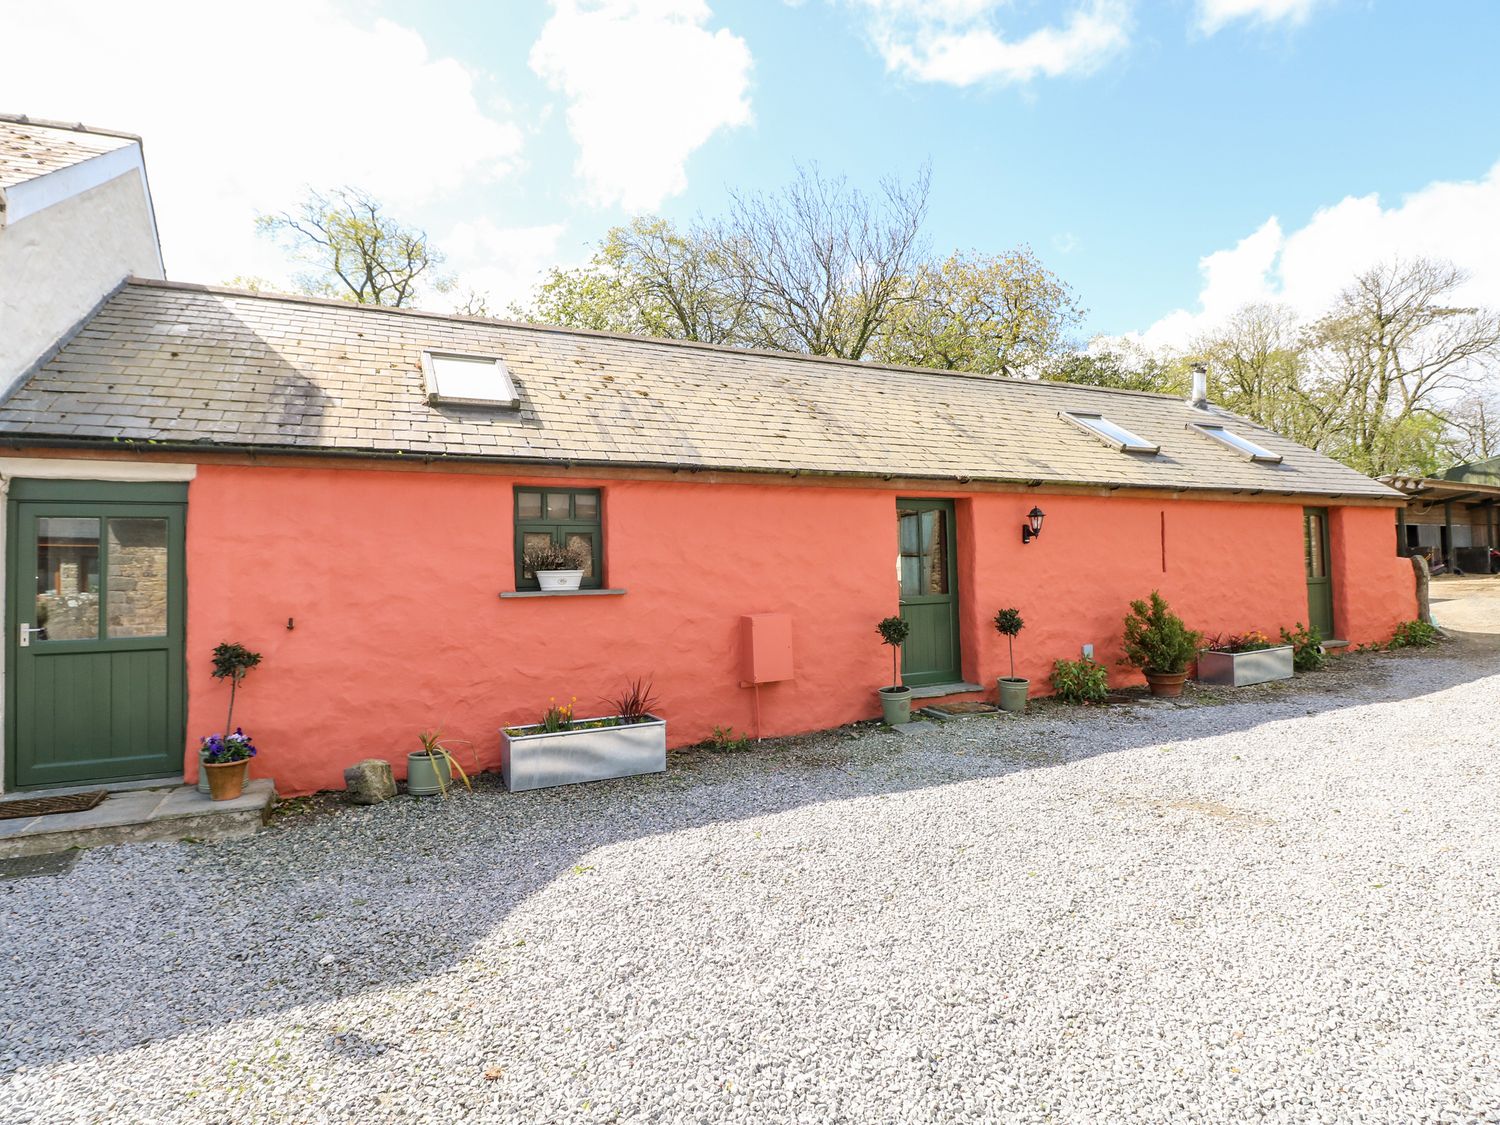 Blueberry Cottage - South Wales - 1067239 - photo 1